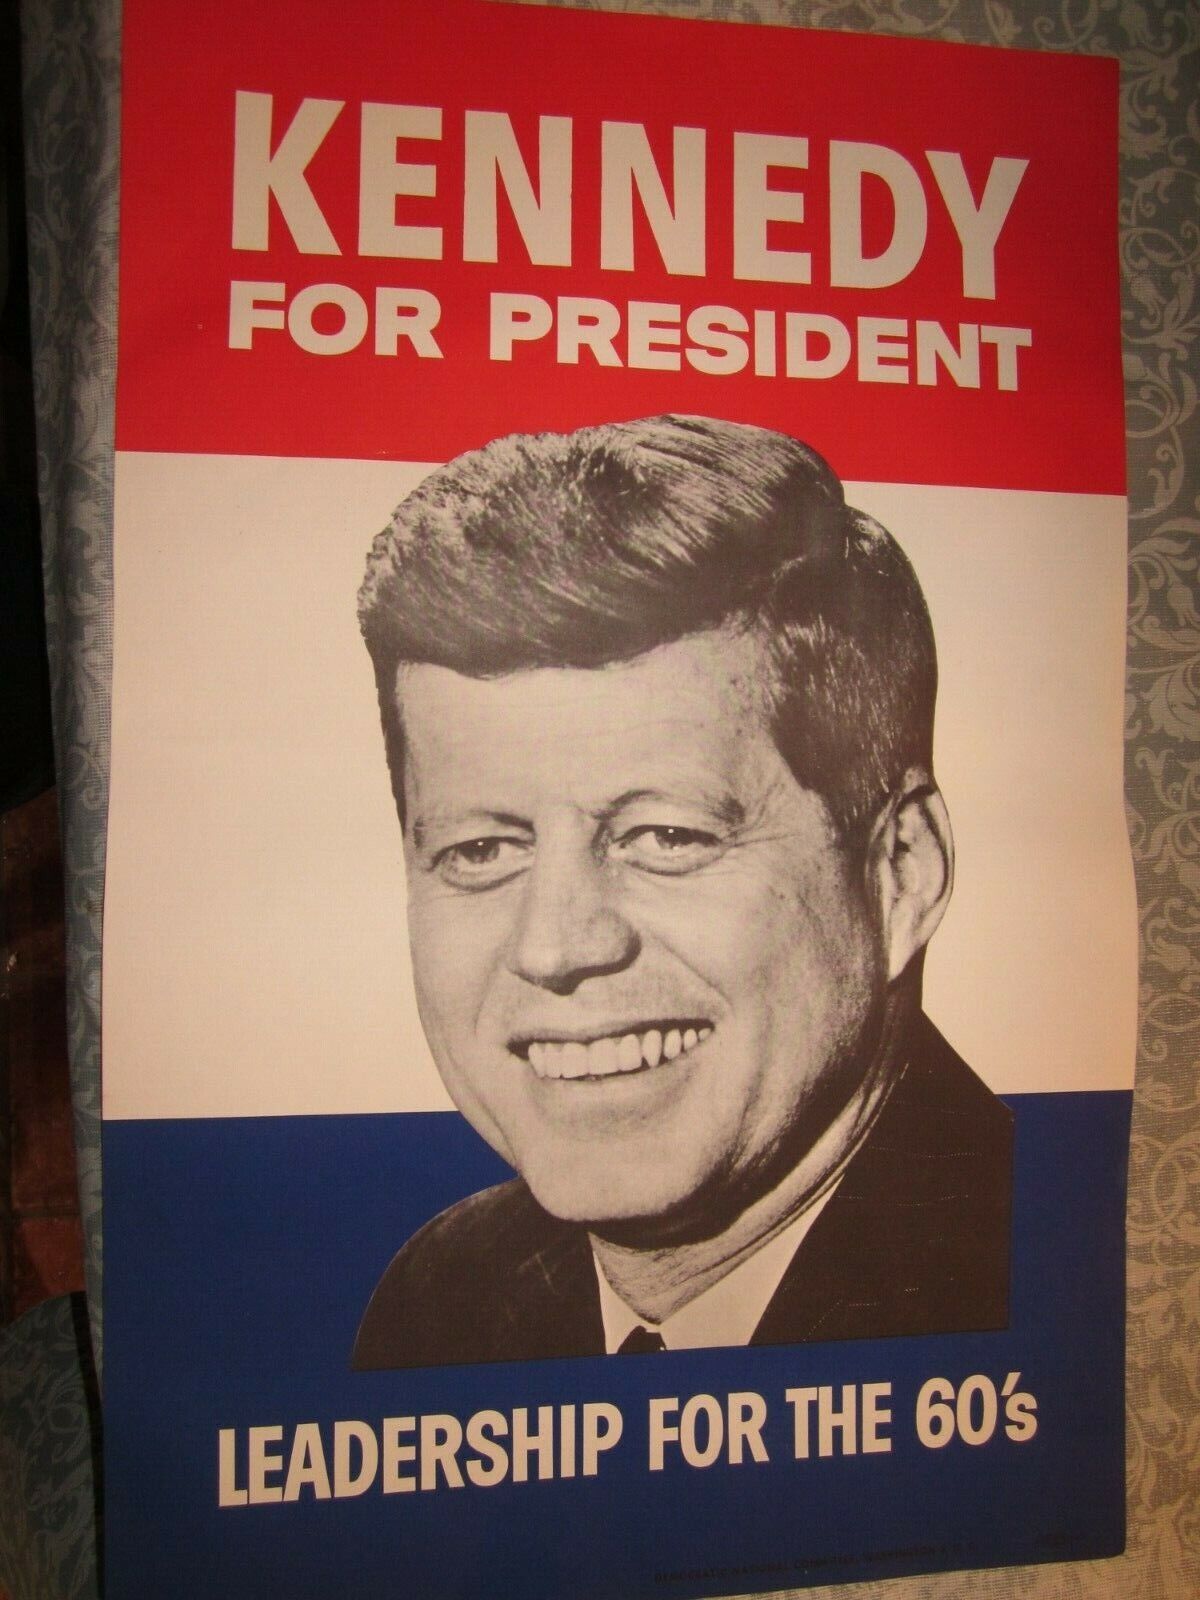 John F Kennedy For President ORIGINAL Campaign Poster Leadership for the 1960's